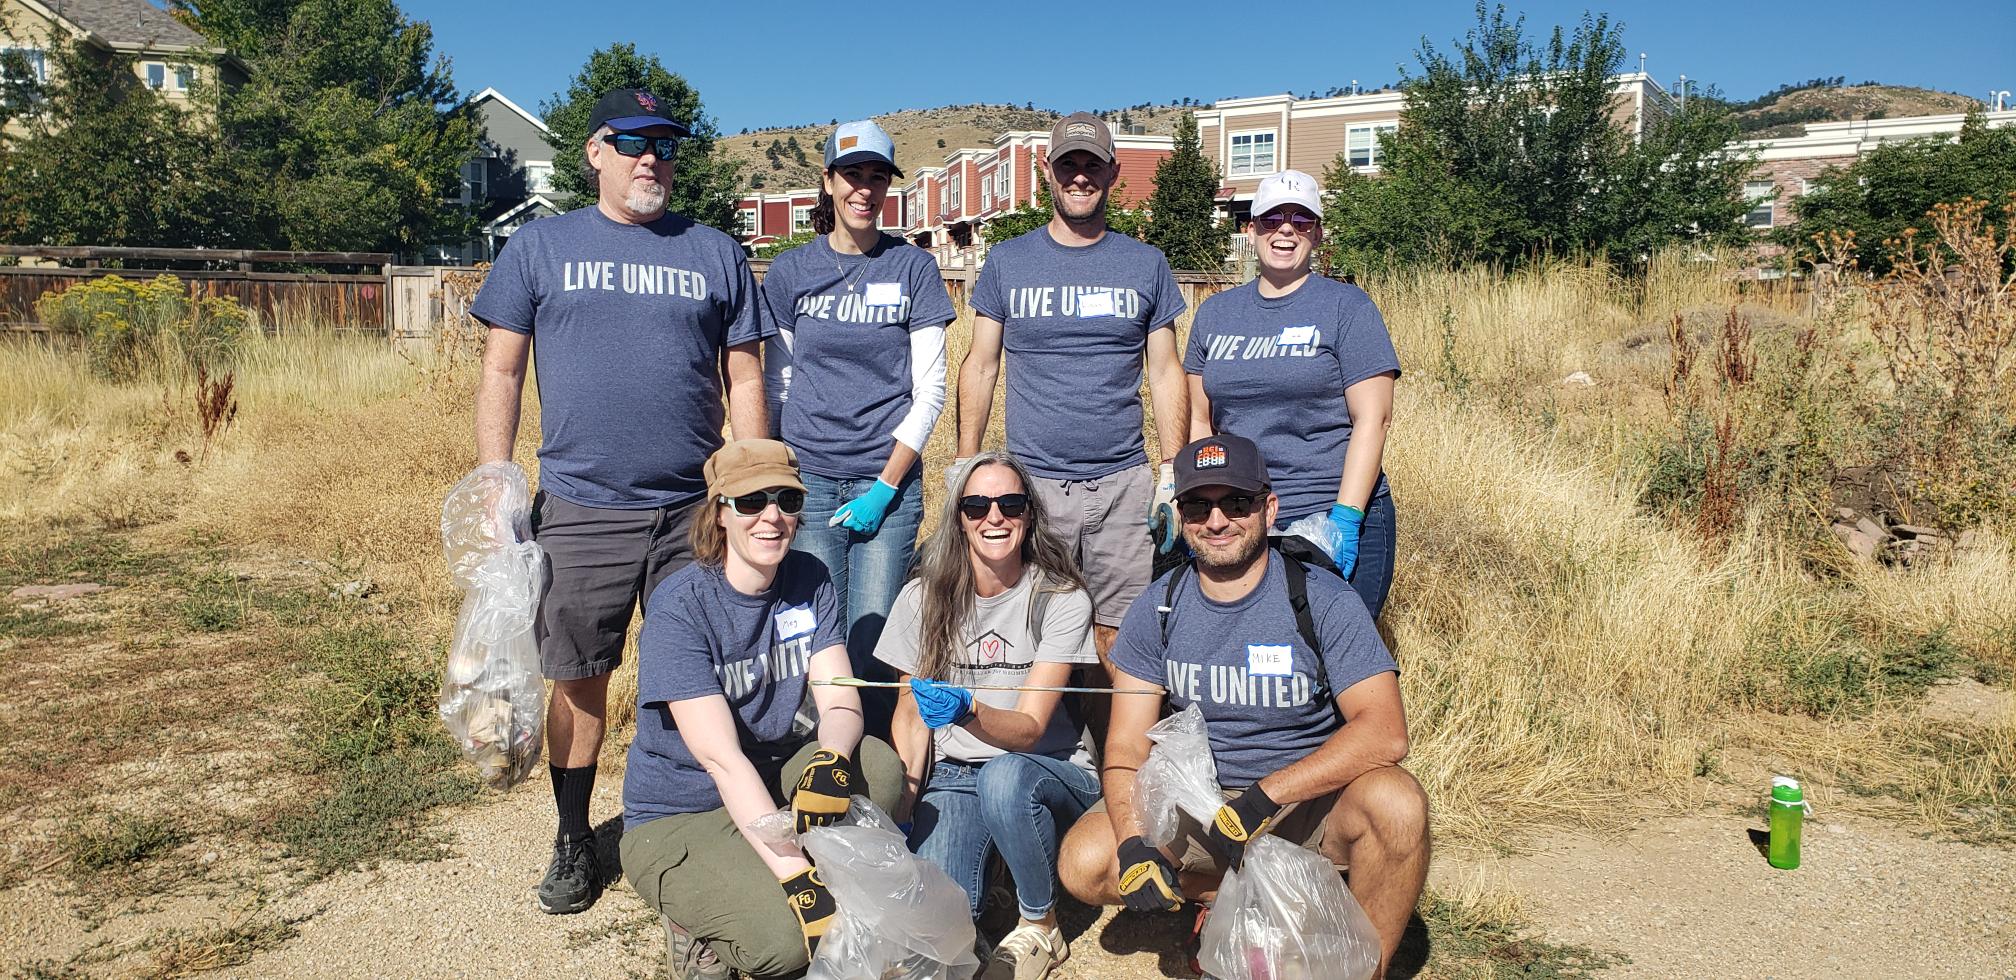 Day of Caring volunteer event with Foothill United Way - Mile High United Way